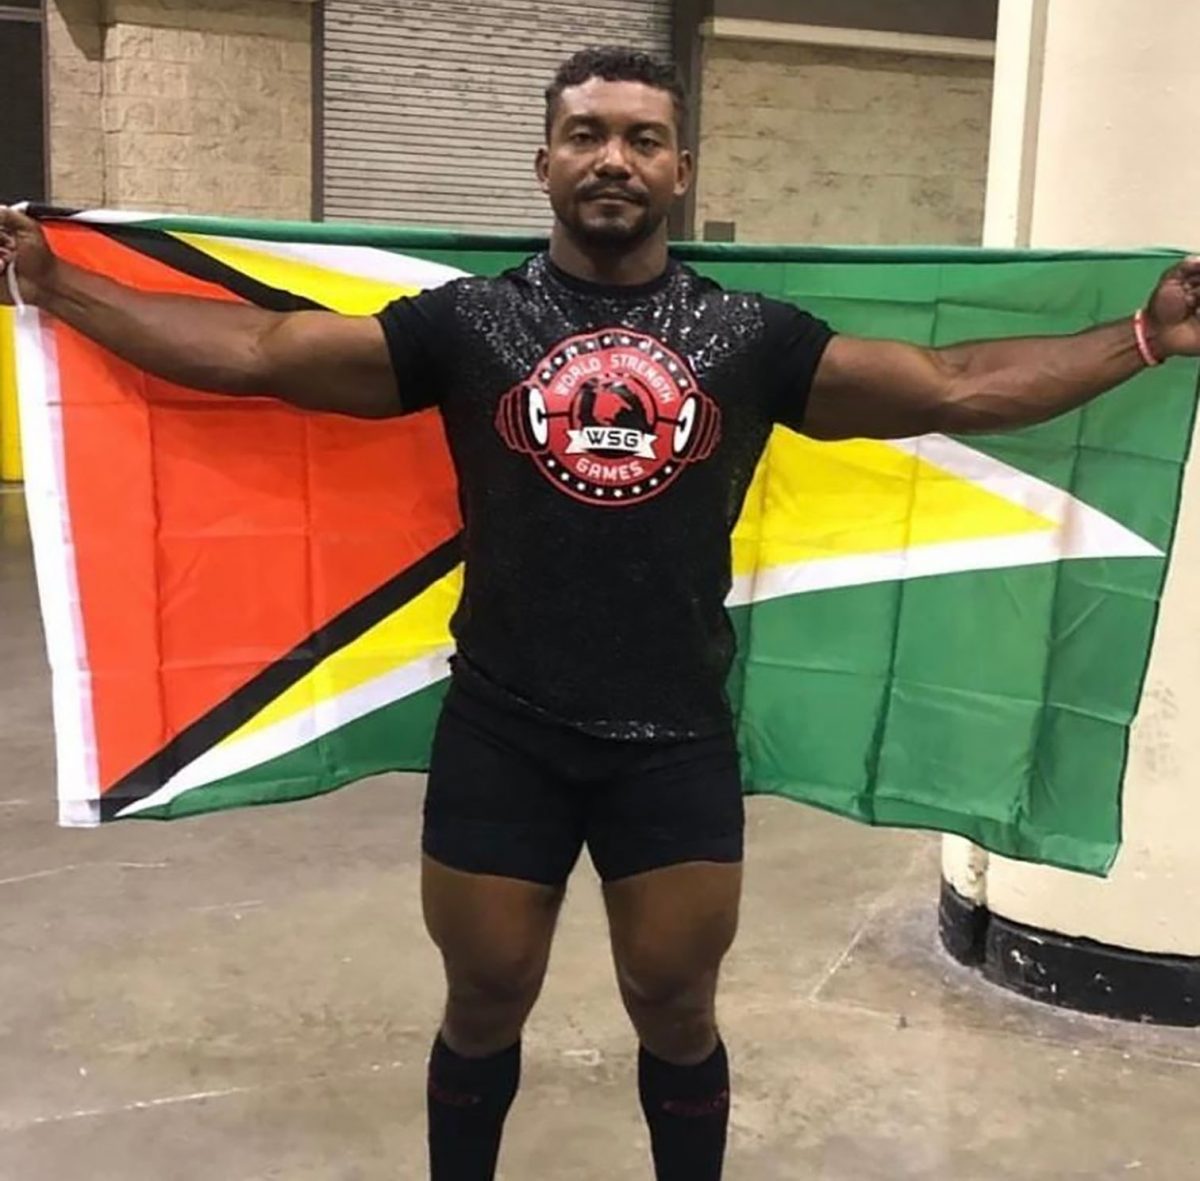 Petterson-Grifith took his otherworldly strength prowess to Orlando, Florida this past weekend and finished on the podium in his debut at the World Strength Games
